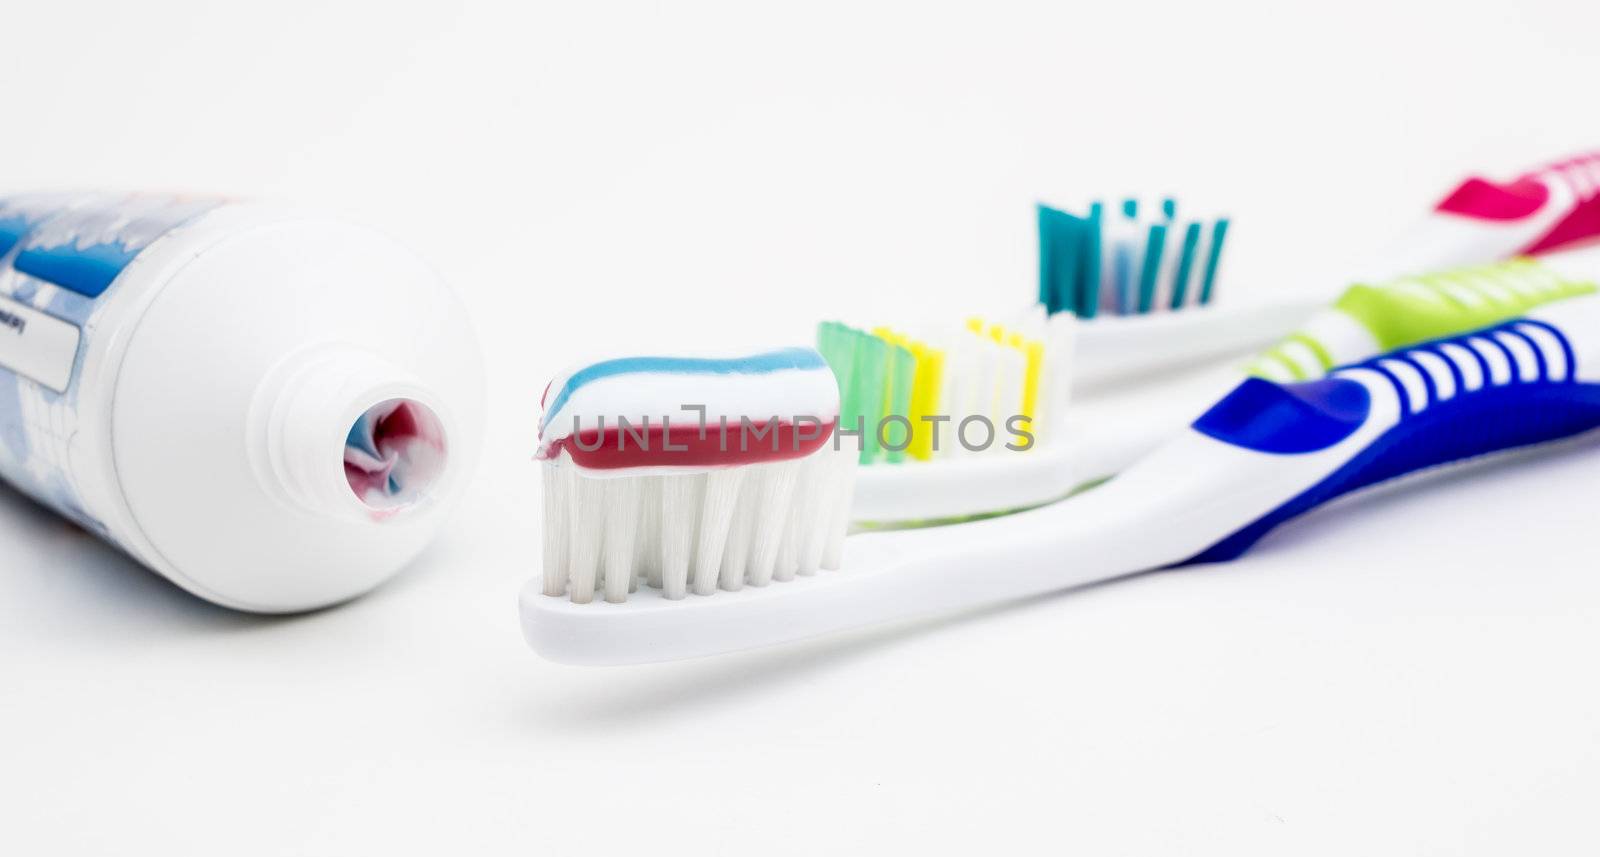 Tooth brush with tooth paste on white background